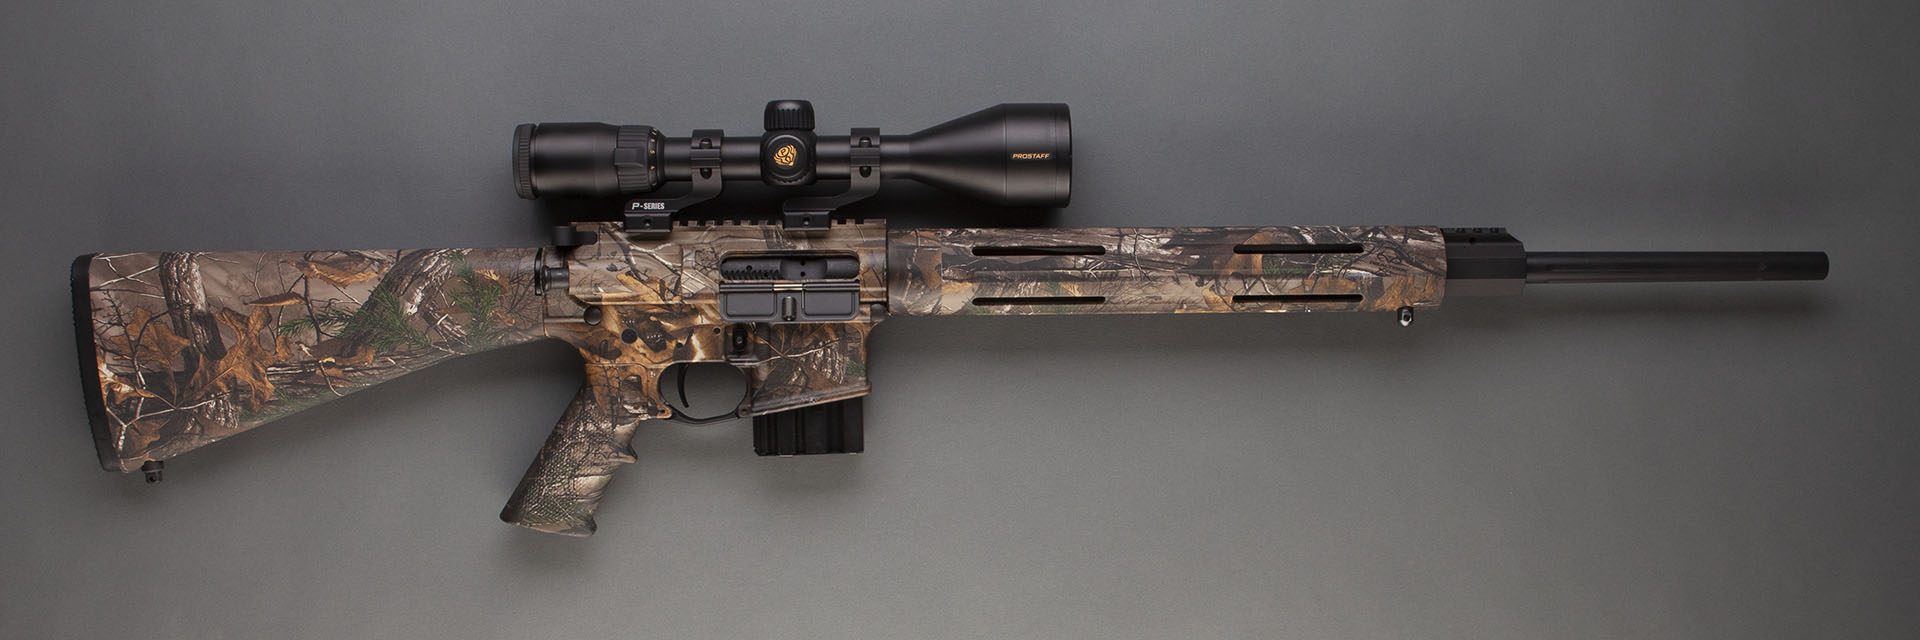 The R-15 VTR is Remington's take on an AR-15 for hunting. 